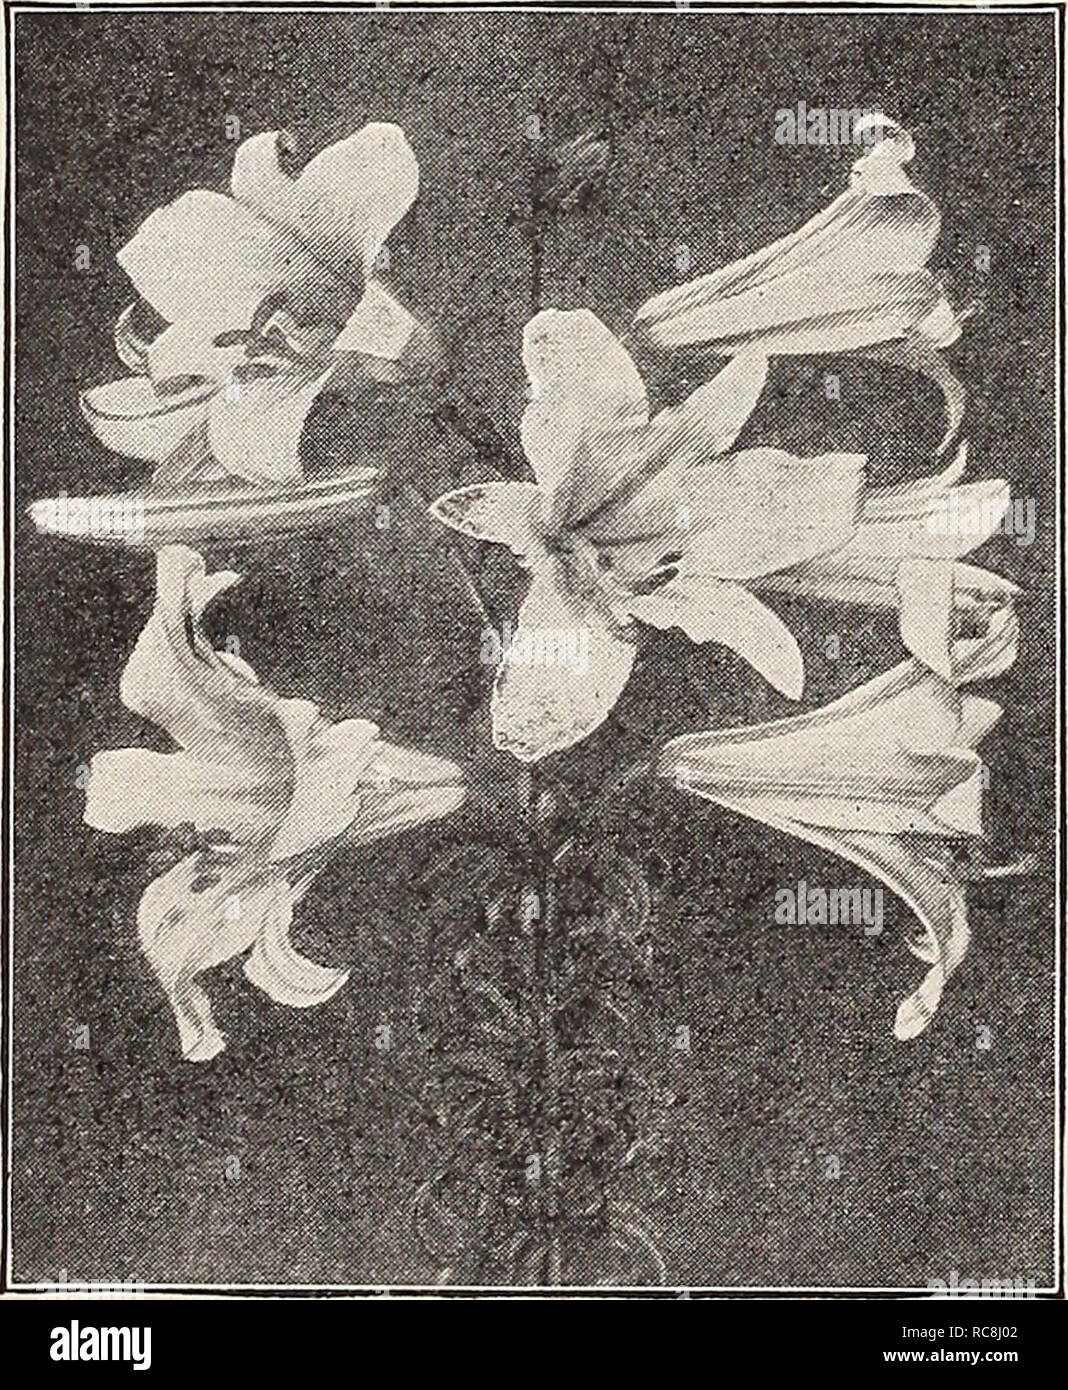 . Dreer's garden book 1932. Seeds Catalogs; Nursery stock Catalogs; Gardening Equipment and supplies Catalogs; Flowers Seeds Catalogs; Vegetables Seeds Catalogs; Fruit Seeds Catalogs. 10. Lilium Regale Double Stock-flowered Larkspur PER PKT. Liatris (Blazing Star, or Gay Feather) 2982 Pycnostachya. Most showy and attractive hardy perennial native plants, with long spikes of rosy- purple flowers from July to September; 3 to 4 feet. I oz., 50 cts $0 10 Liliums 2987 Philippinense Formosanum. A truly remarkable lily, with umbels of large white long trumpet shaped flowers, like an Easter Lily. Will Stock Photo